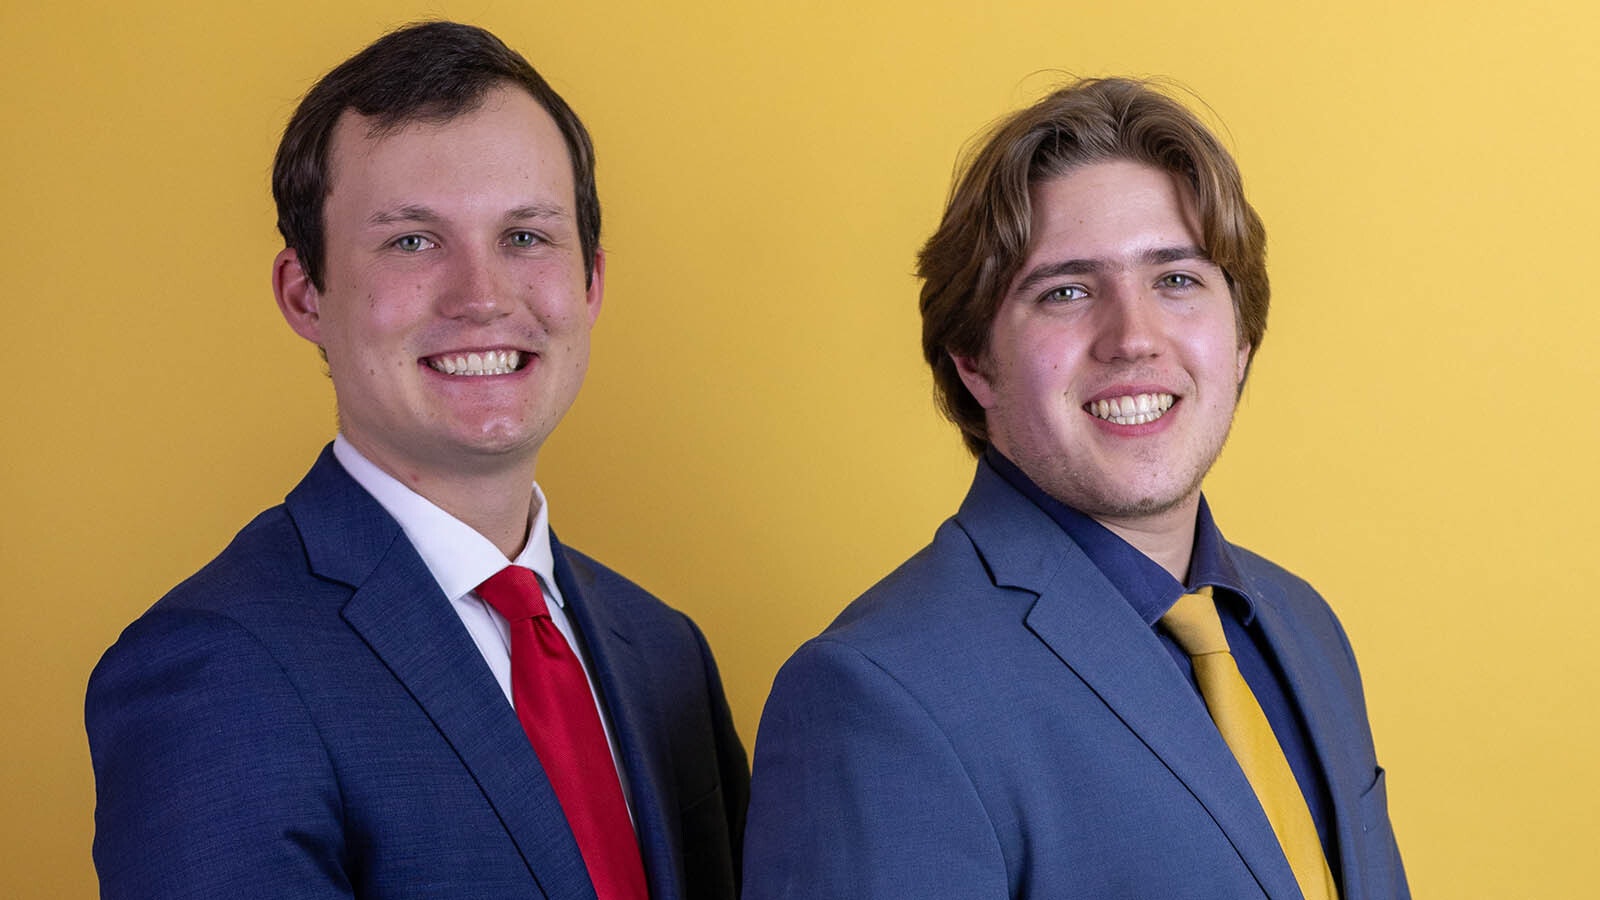 University of Wyoming student candidates Gabe Saint, left, and JW Rzeszut have received endorsements from the Wyoming Freedom Caucus.